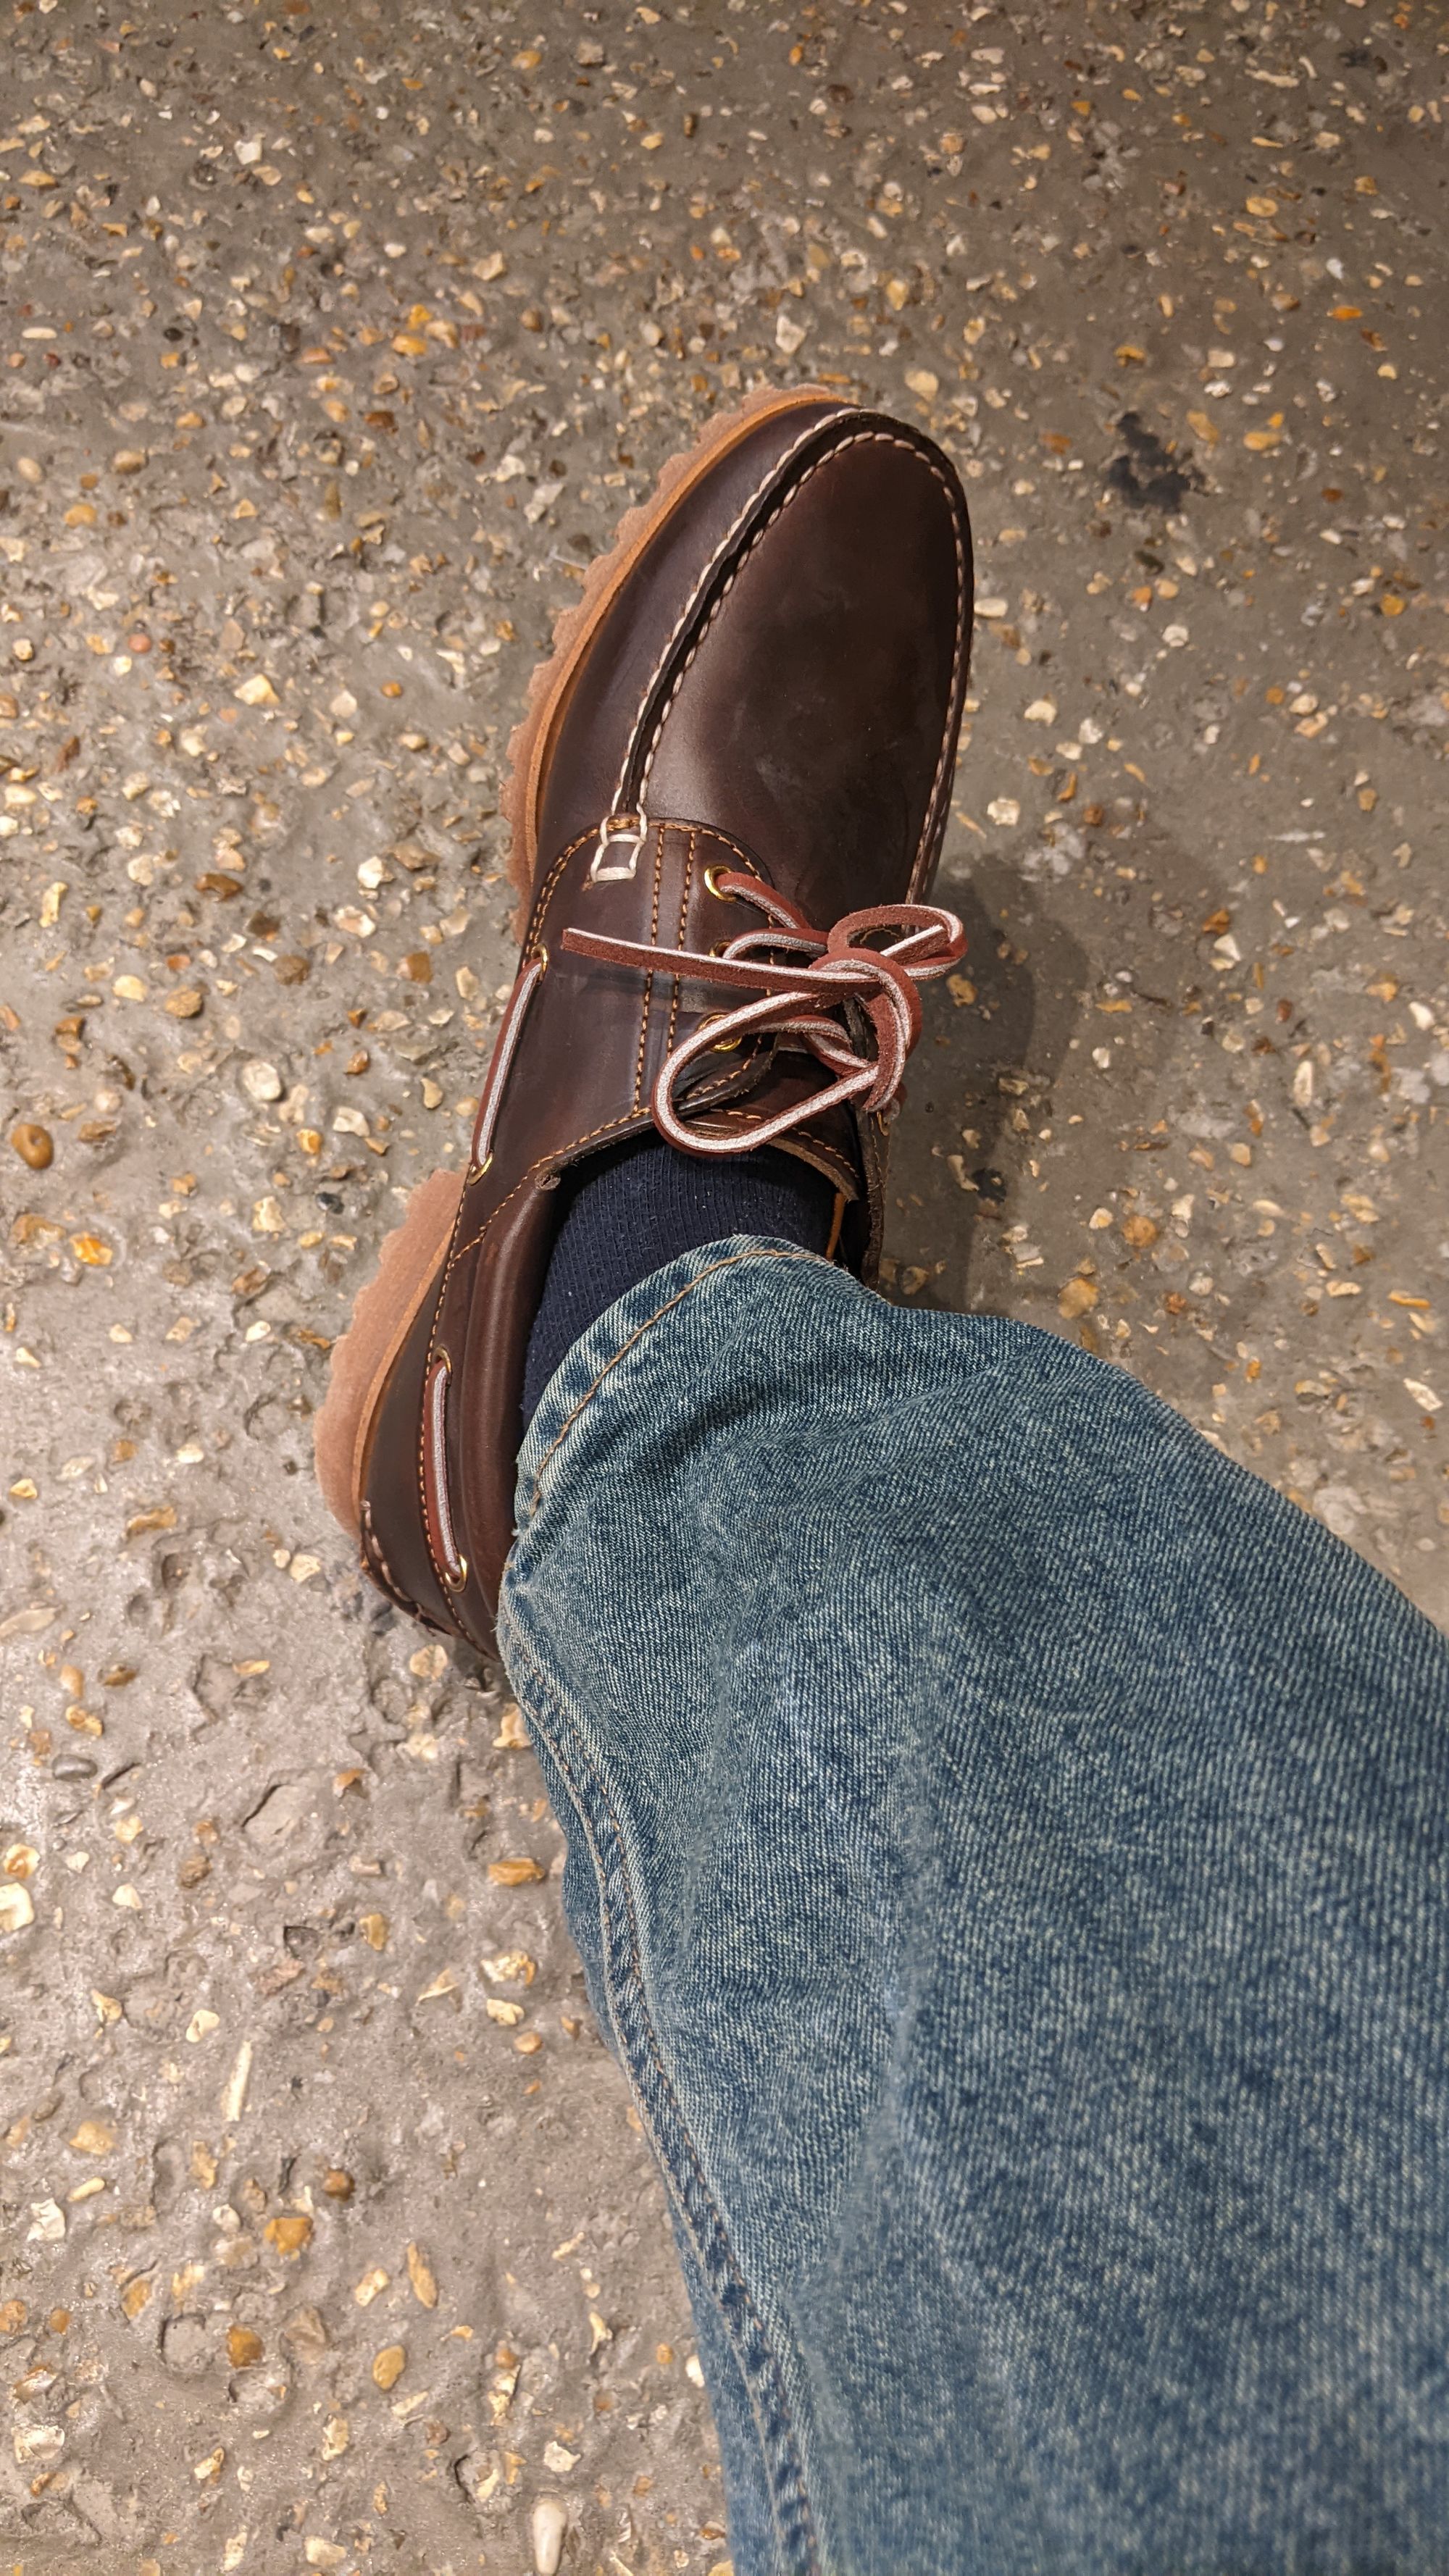 A brown shoe attached to a leg with blue jeans